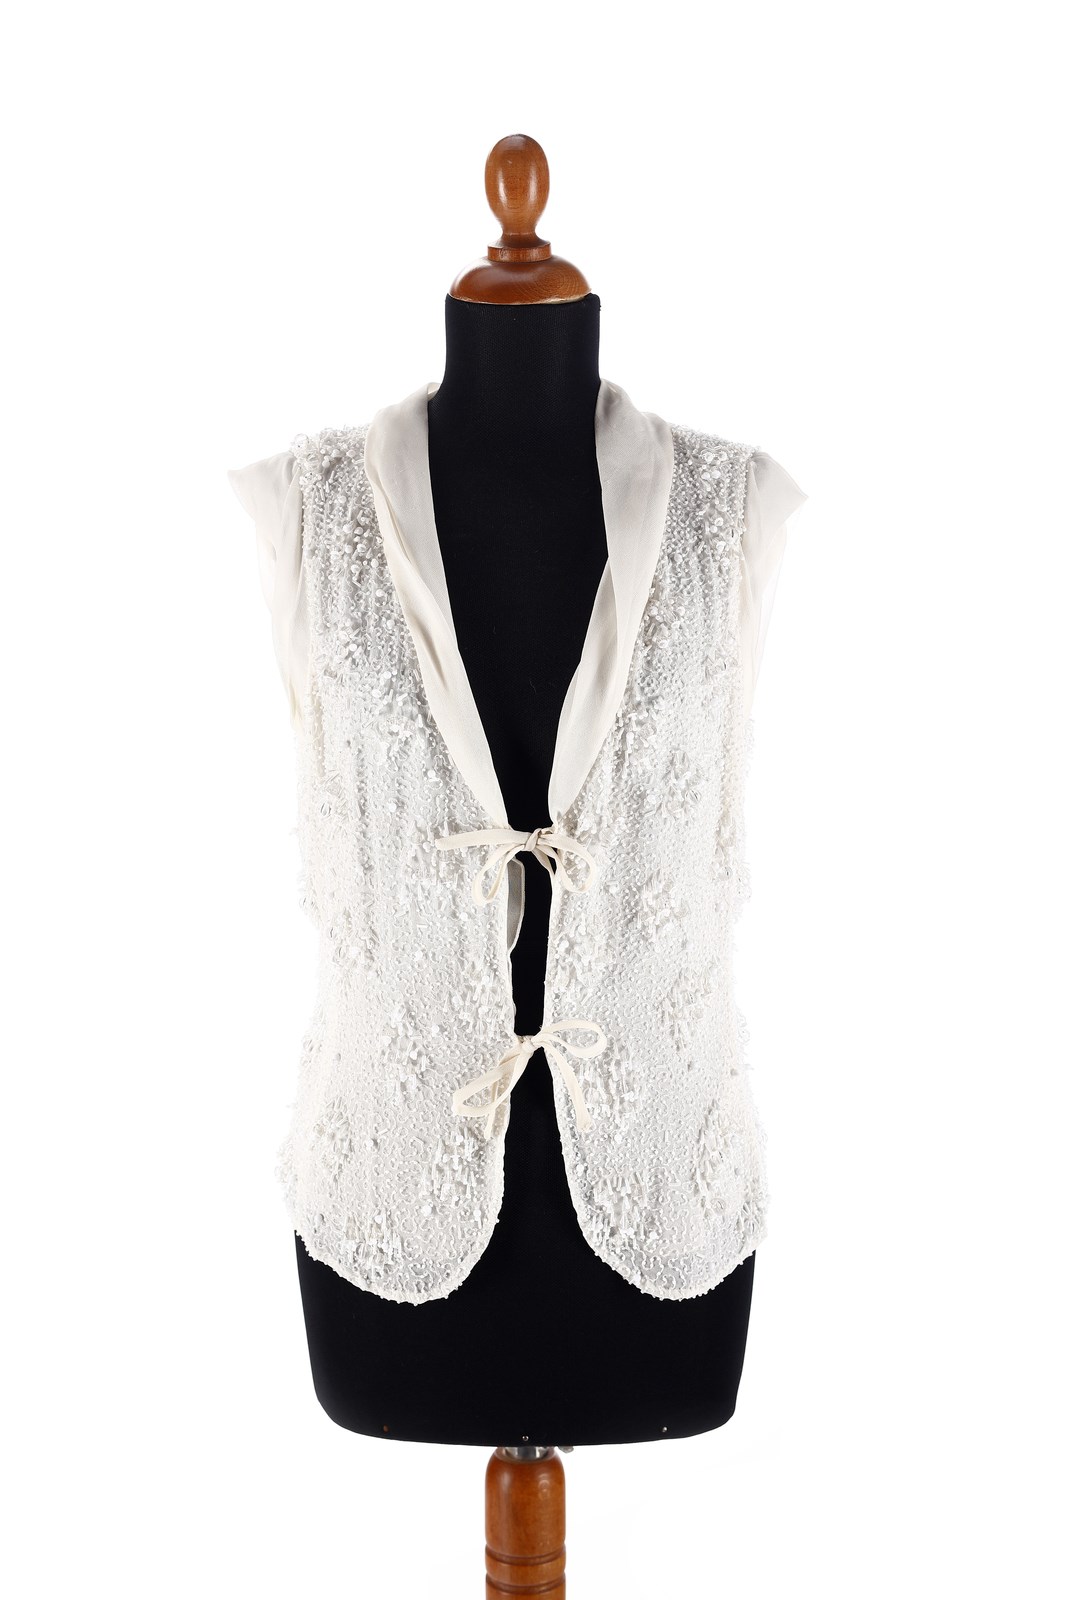 Silk vest with pearls ivory colored. (Emporio Armani)